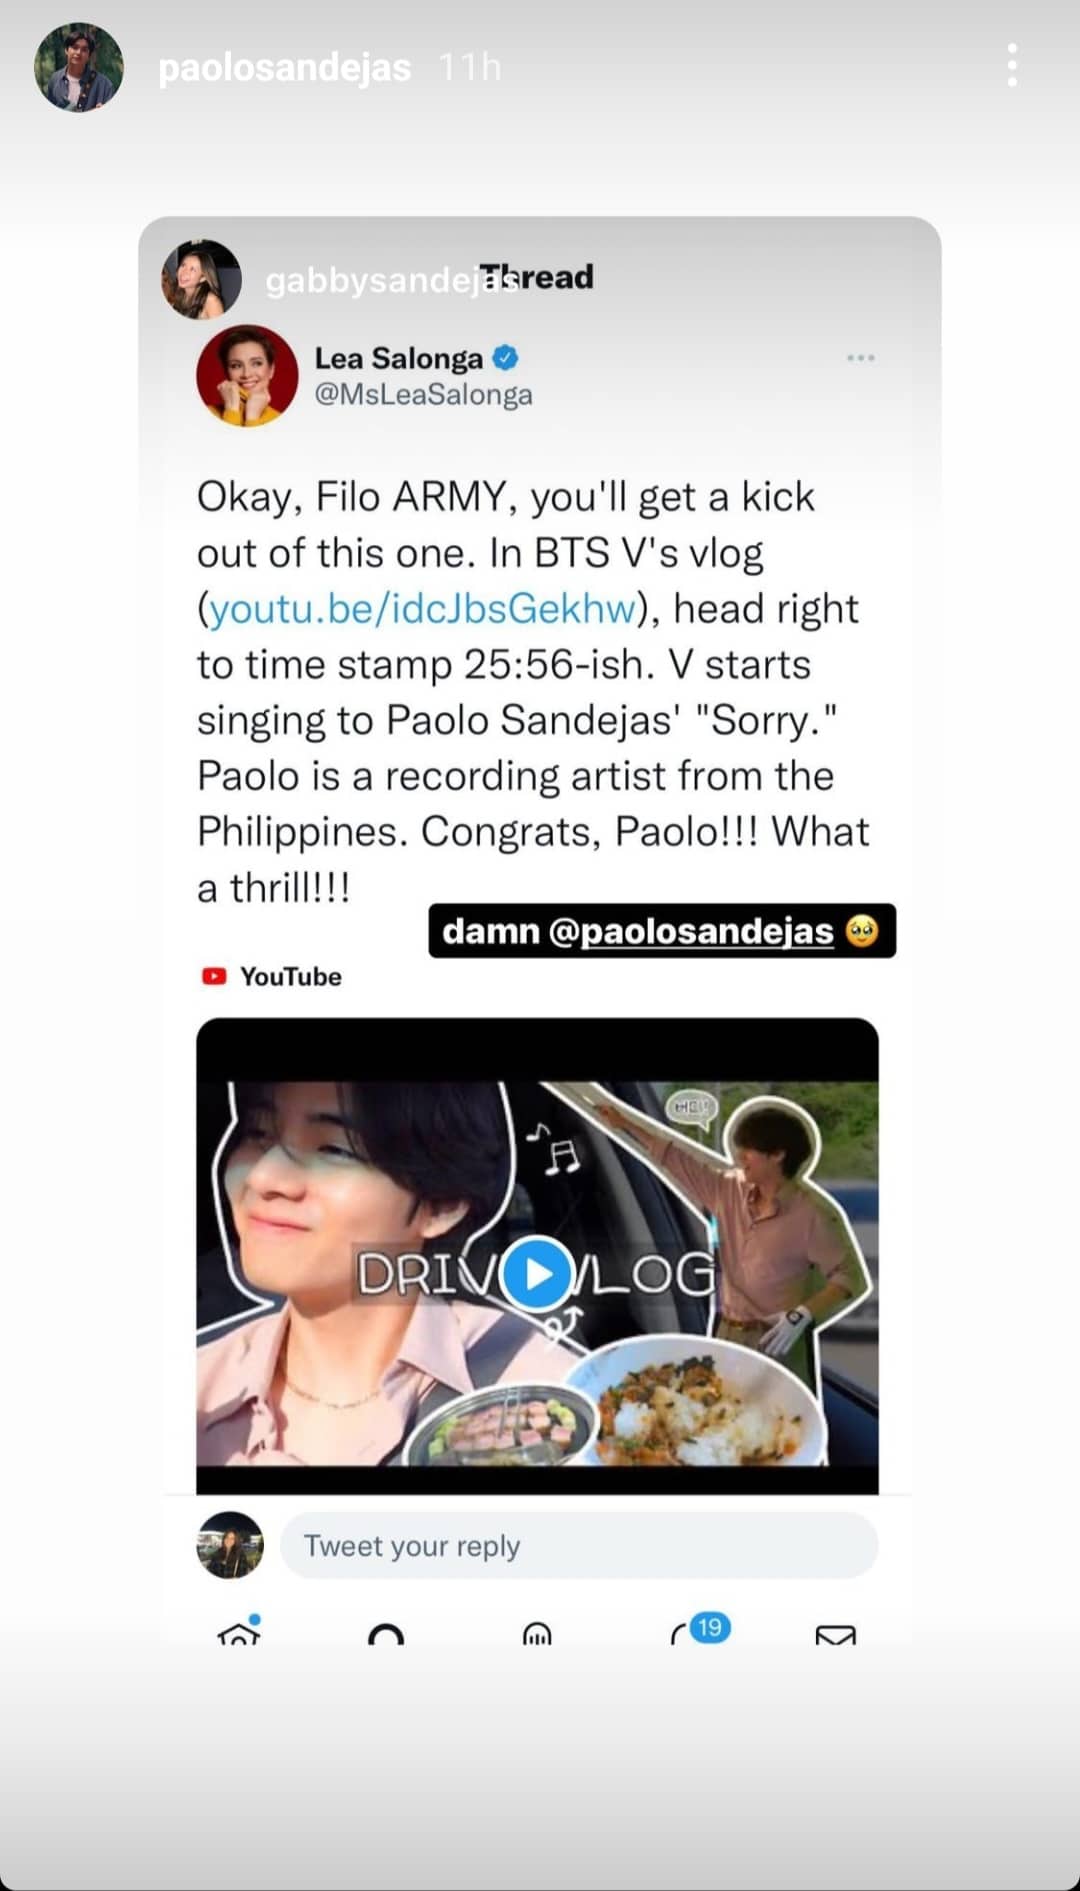 lea salonga congratulates paolo sandejas on the inclusion of his song sorry in bts v's vlog